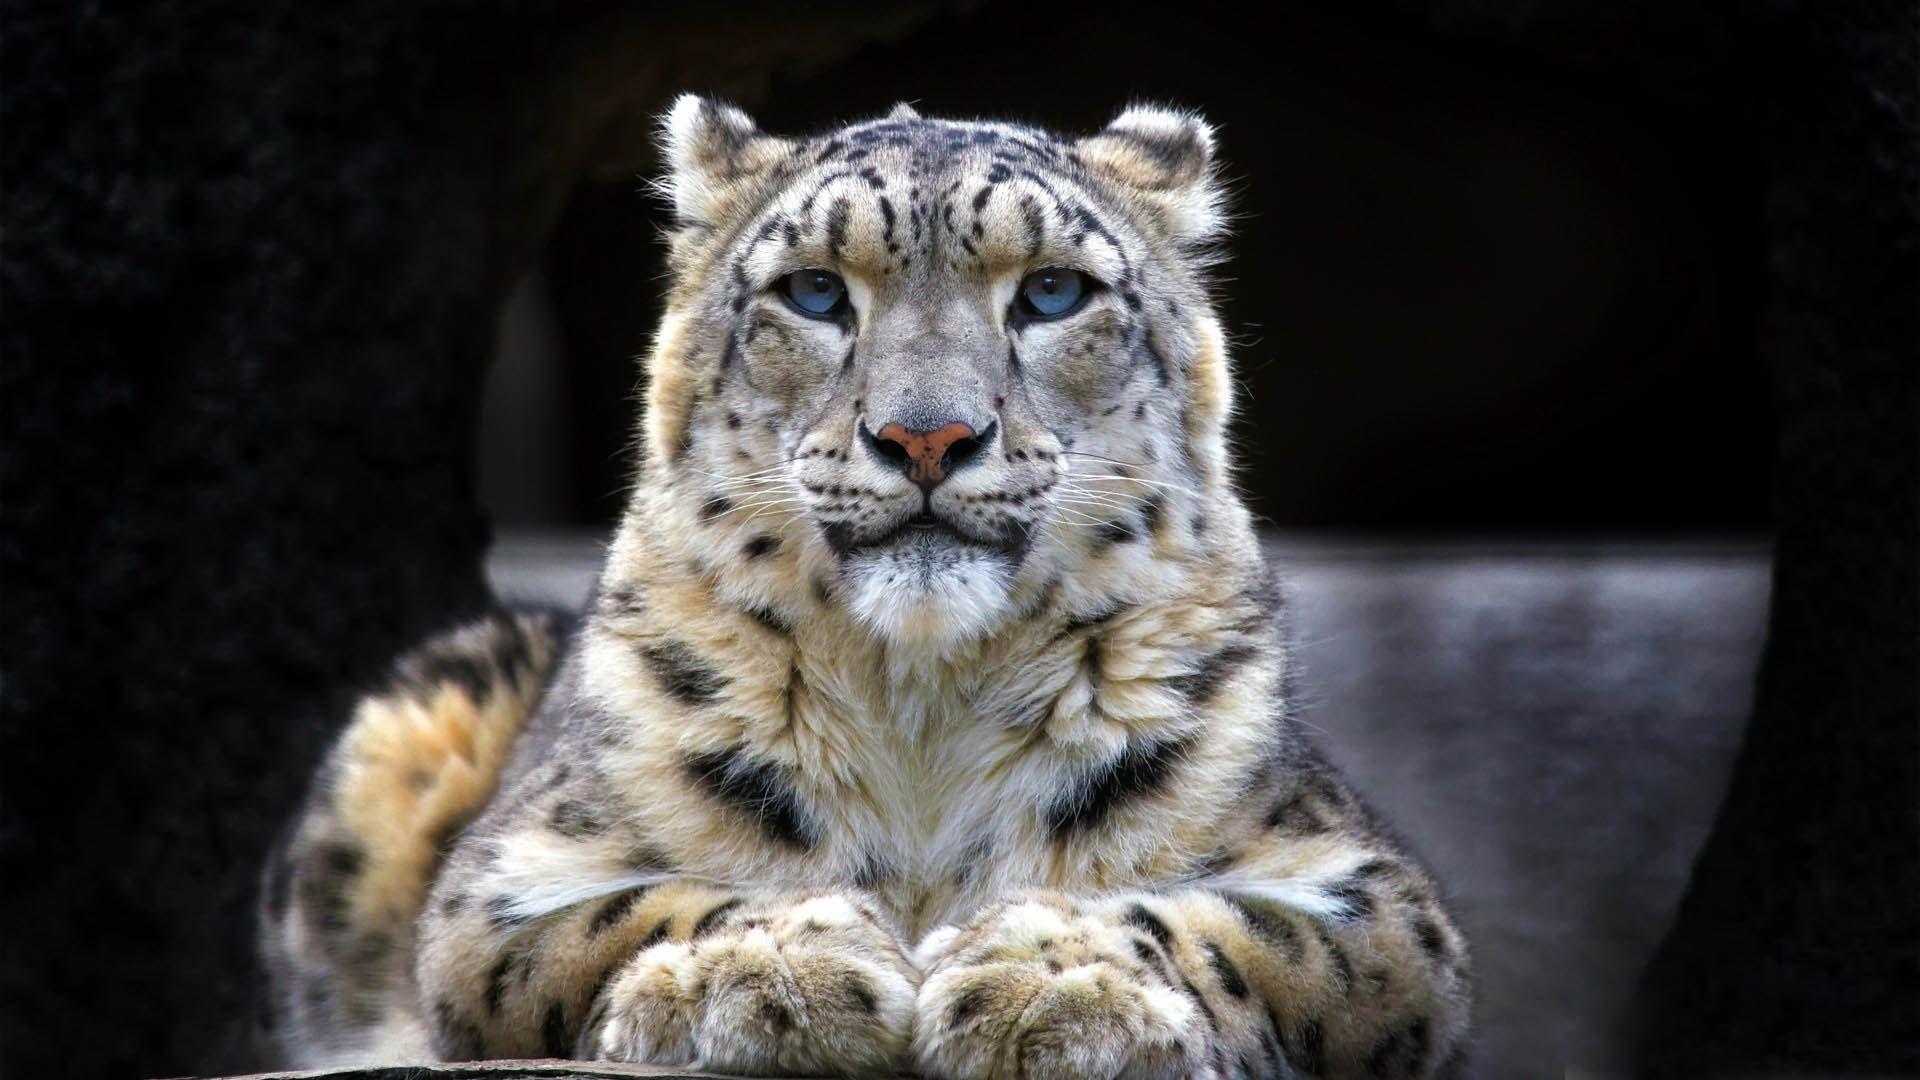 The Snow Leopard: All You Need To Know